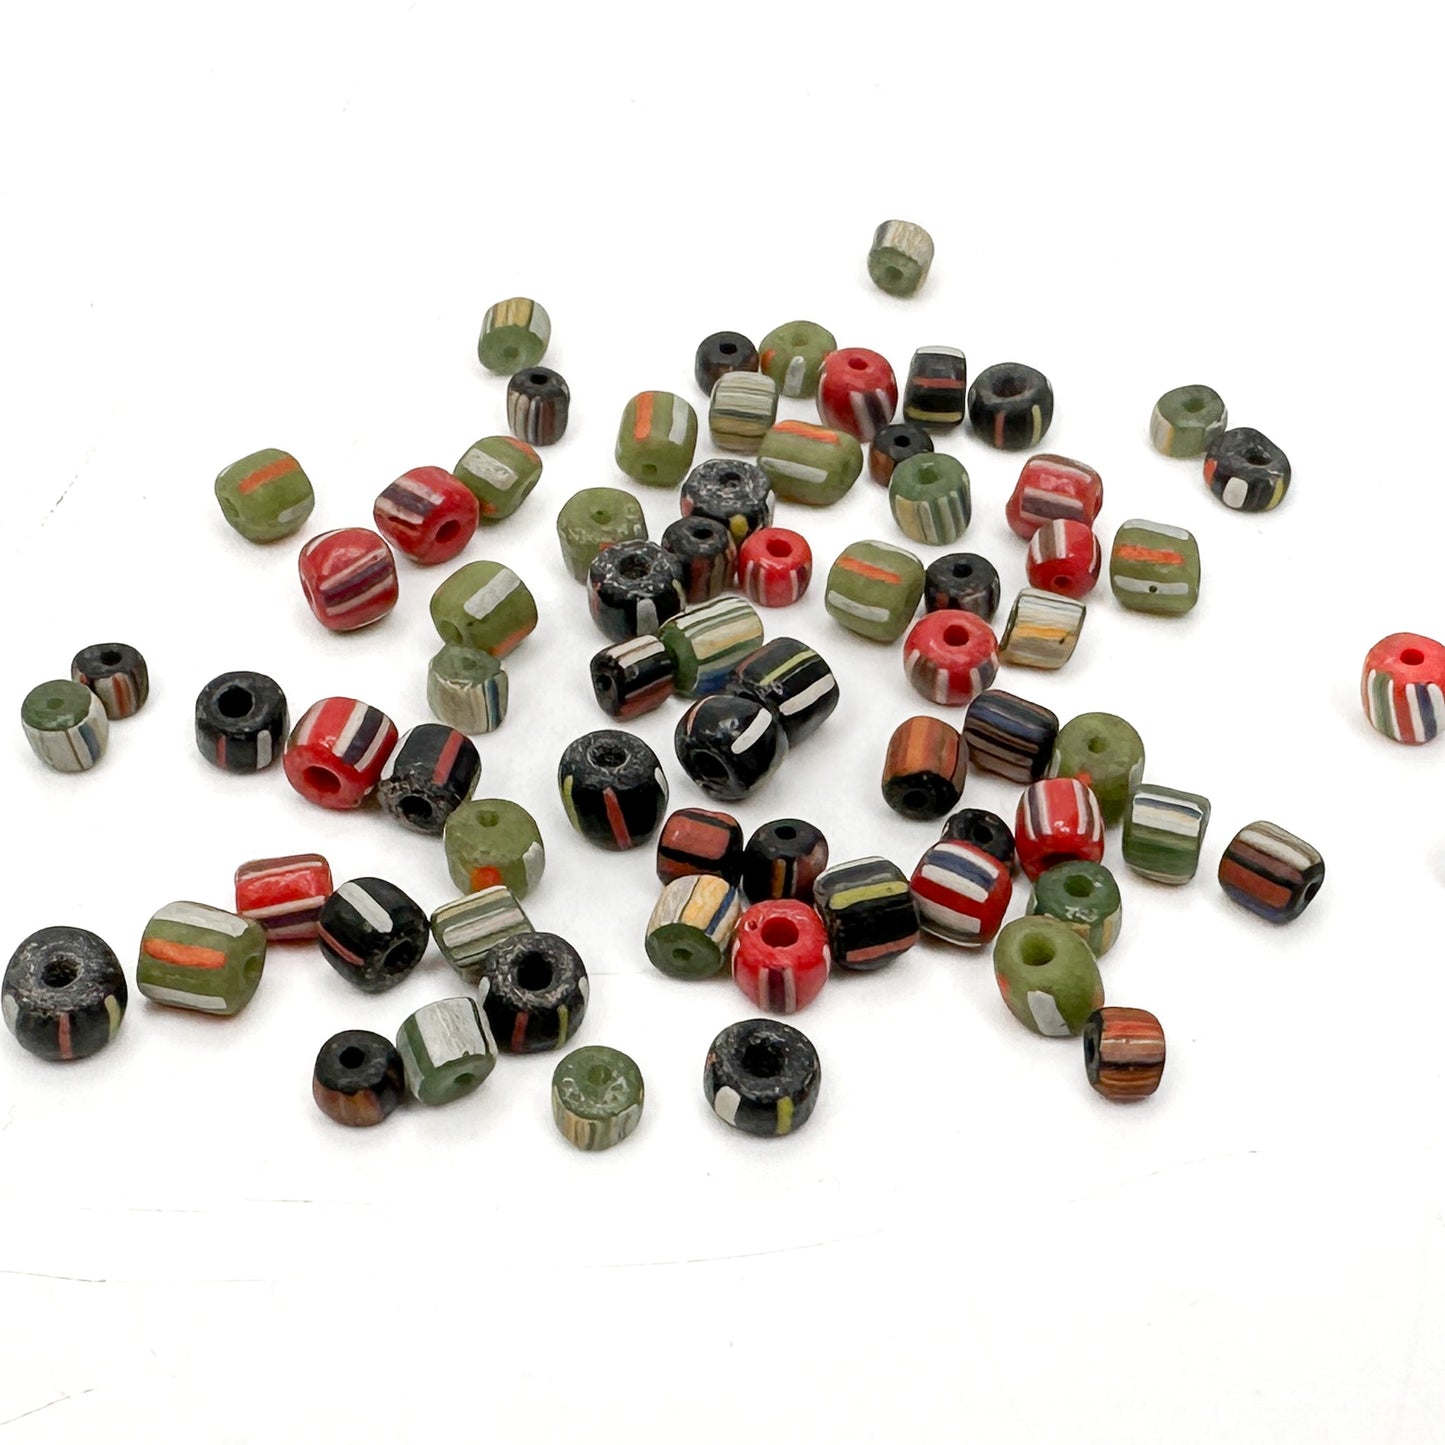 Java Glass Bead Mix (11 Color Options) - Approx. 86 pcs.-The Bead Gallery Honolulu